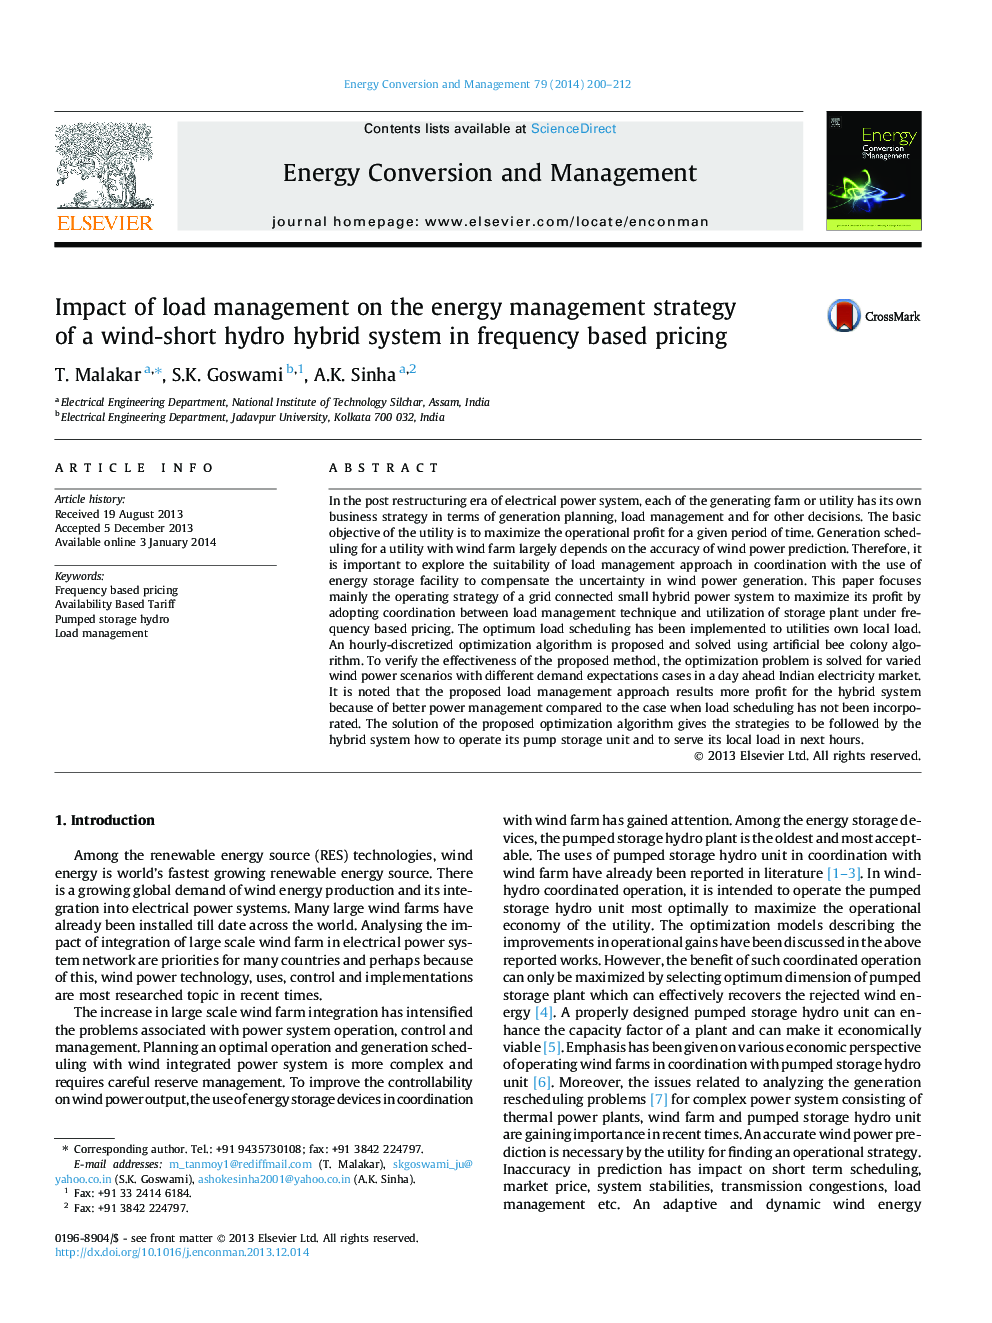 Impact of load management on the energy management strategy of a wind-short hydro hybrid system in frequency based pricing